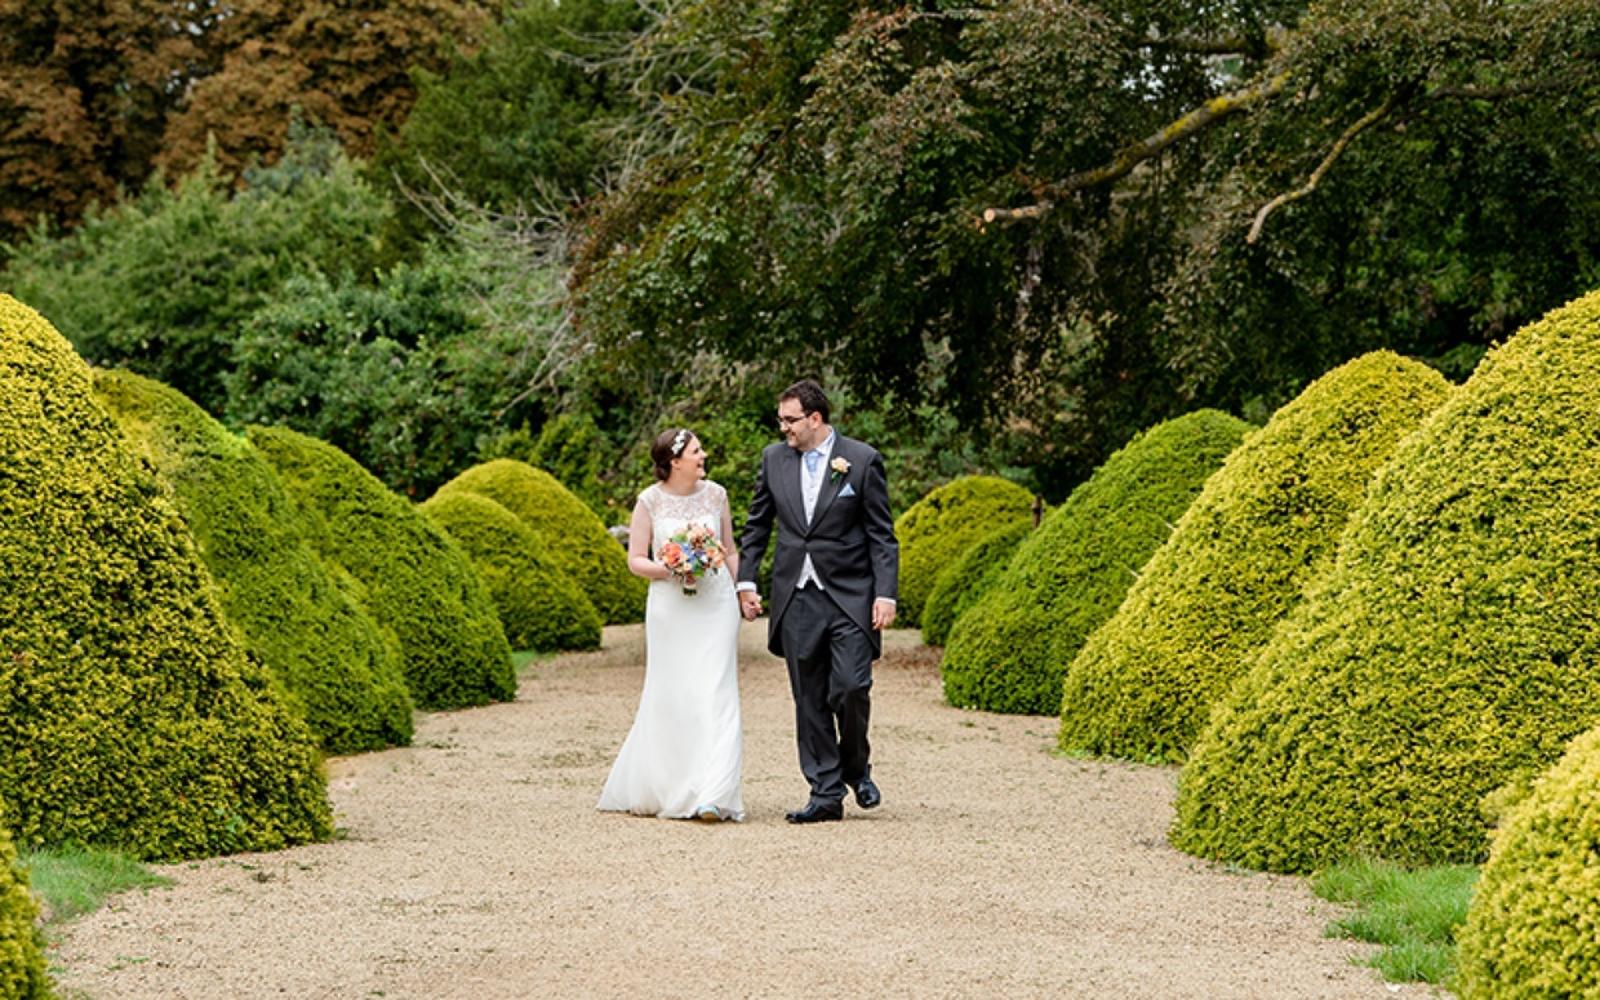 Capture Every Moment Real Wedding photographer Cirencester Manor by the Lake Cheltenham tree lined gardens